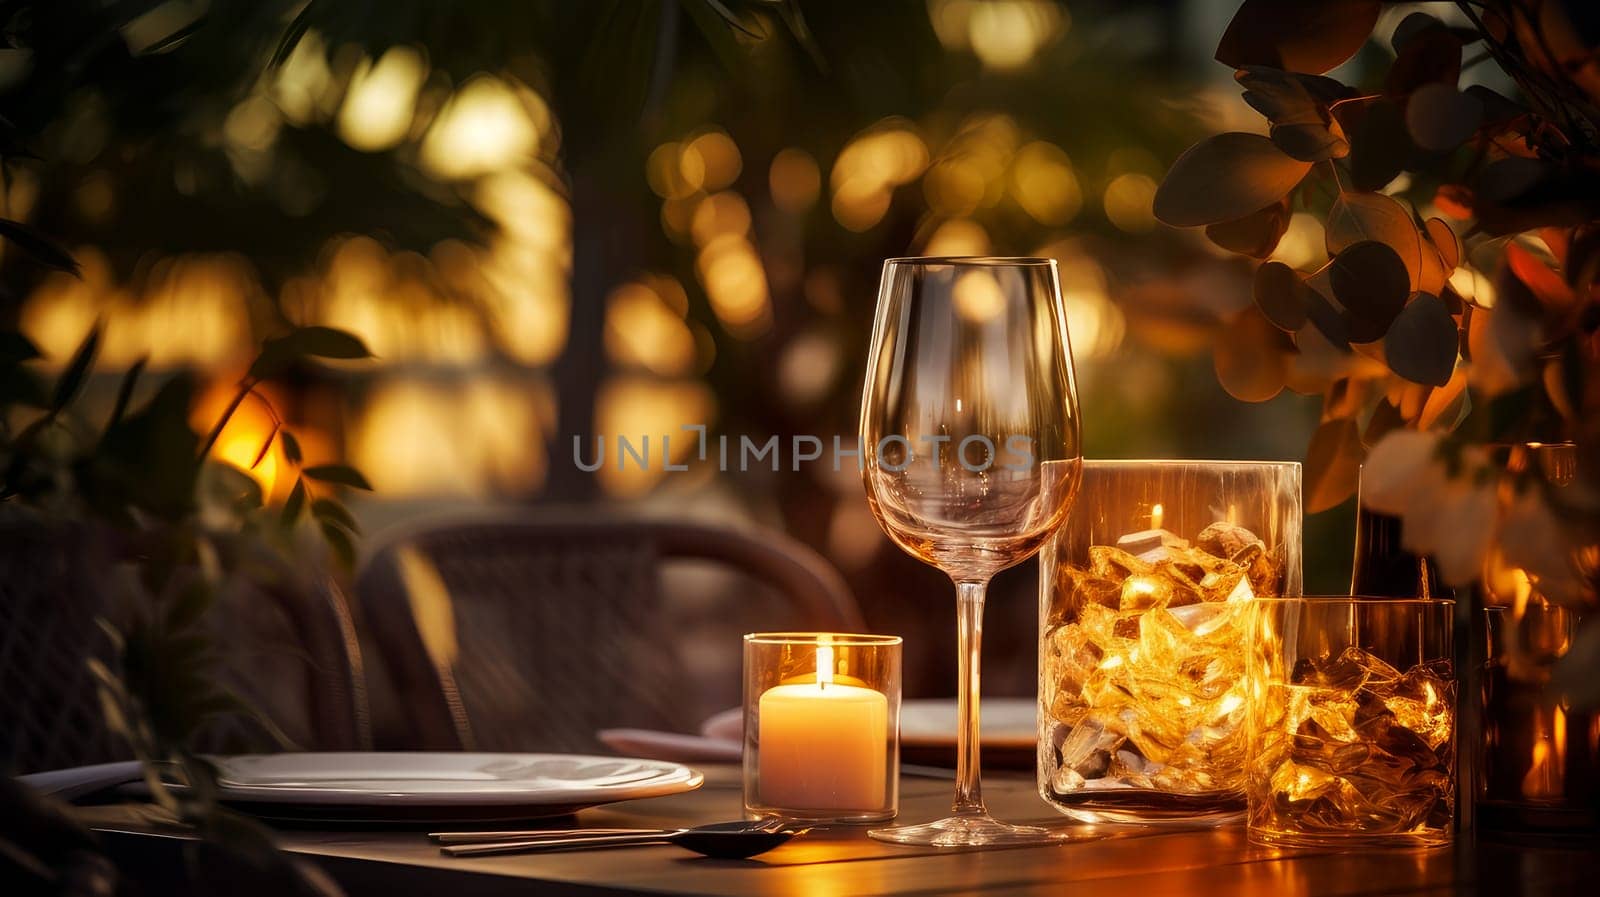 Dinner in a chic restaurant, on the terrace in the fresh air, by candlelight with a glass of champagne or wine, with beautiful glowing lights. by Alla_Yurtayeva